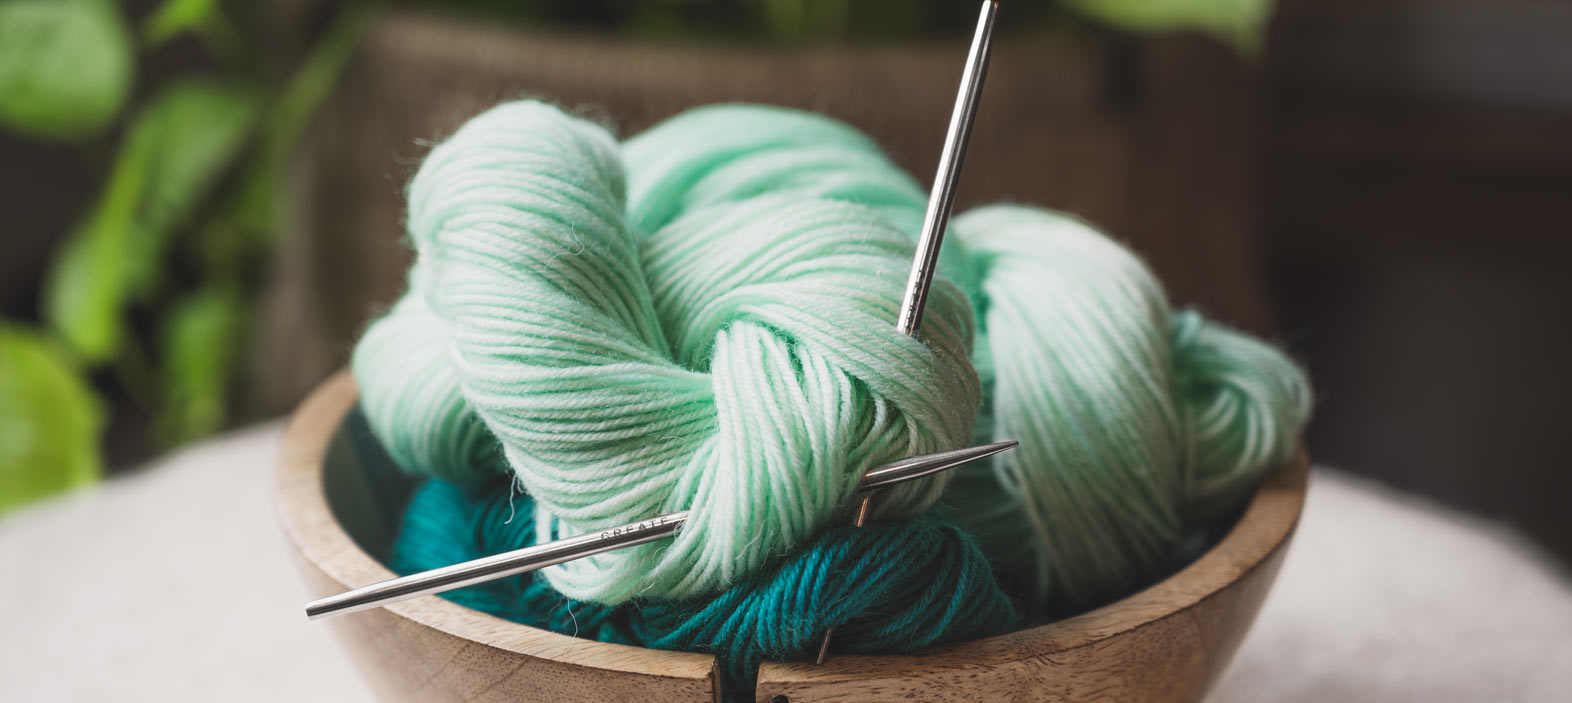 10 Easy Knitting Projects for Beginners